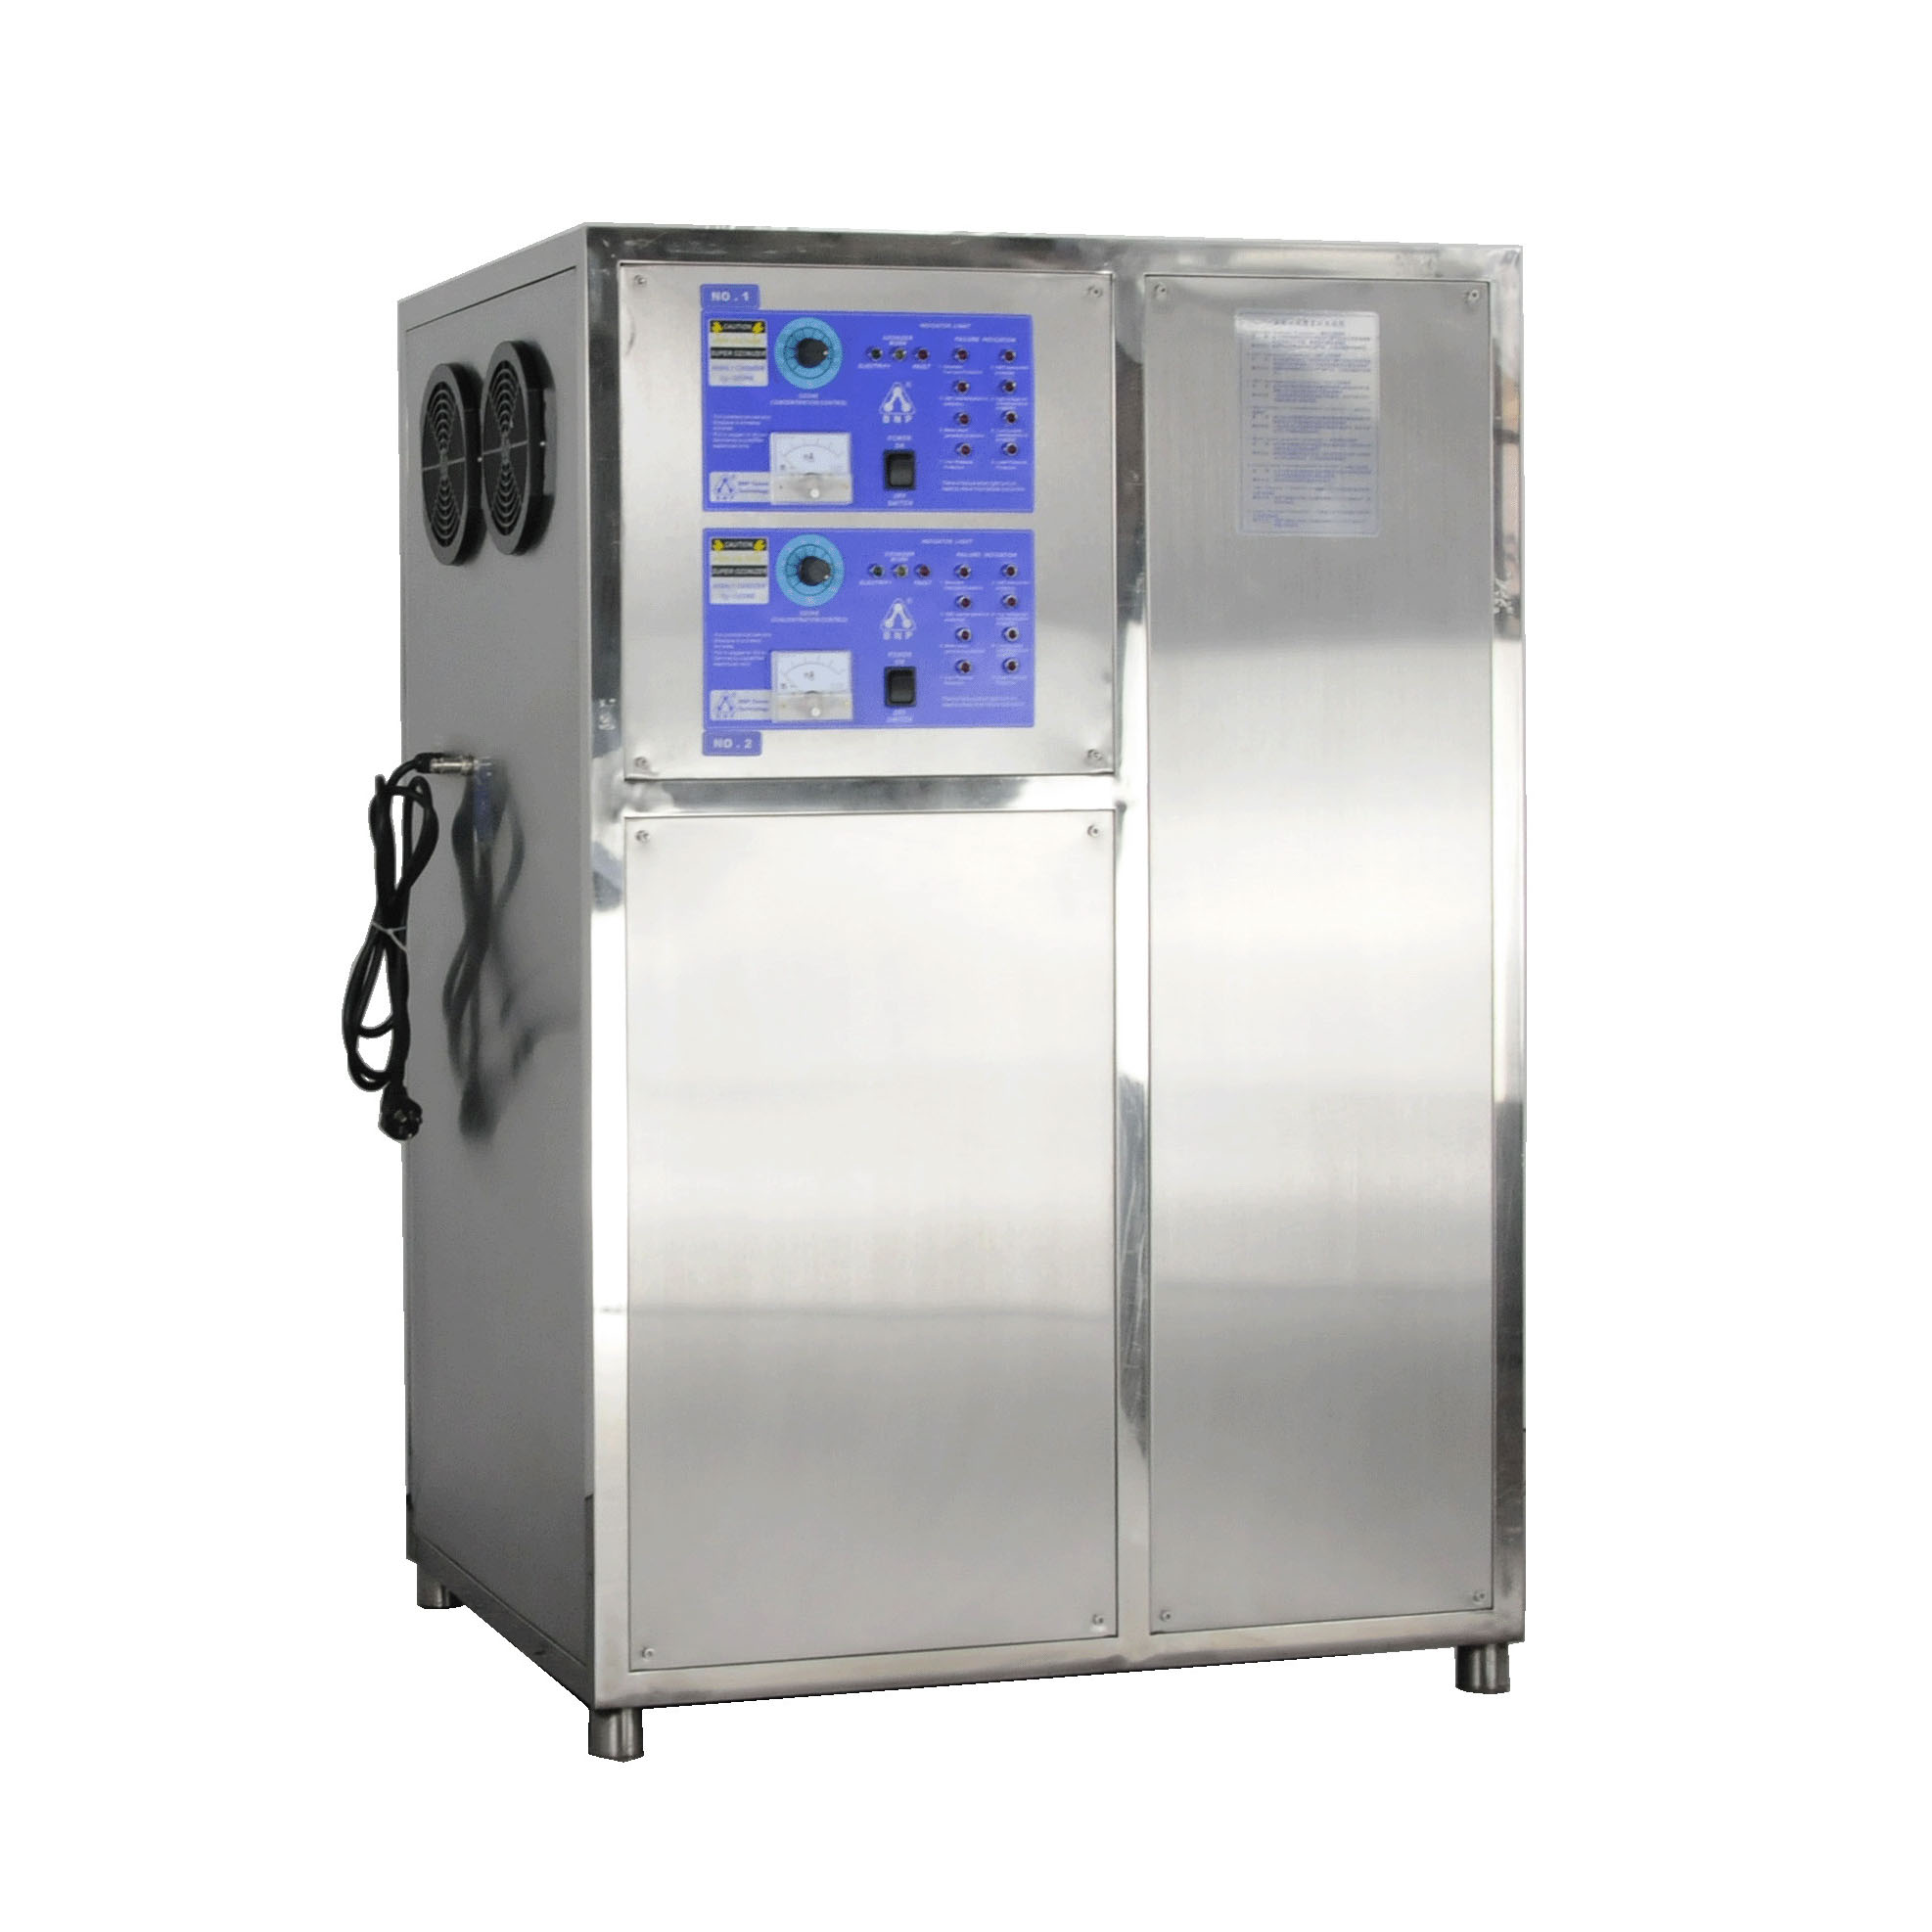 Wholesale Dealers of Swimming Pool Water Treatment Ozone Generator - Discountable Price China BNP SOZ-YW-150G Ozone Generator O3 Machine Water Purifier Swimming Pool Ozonizer For Water Treatment &...